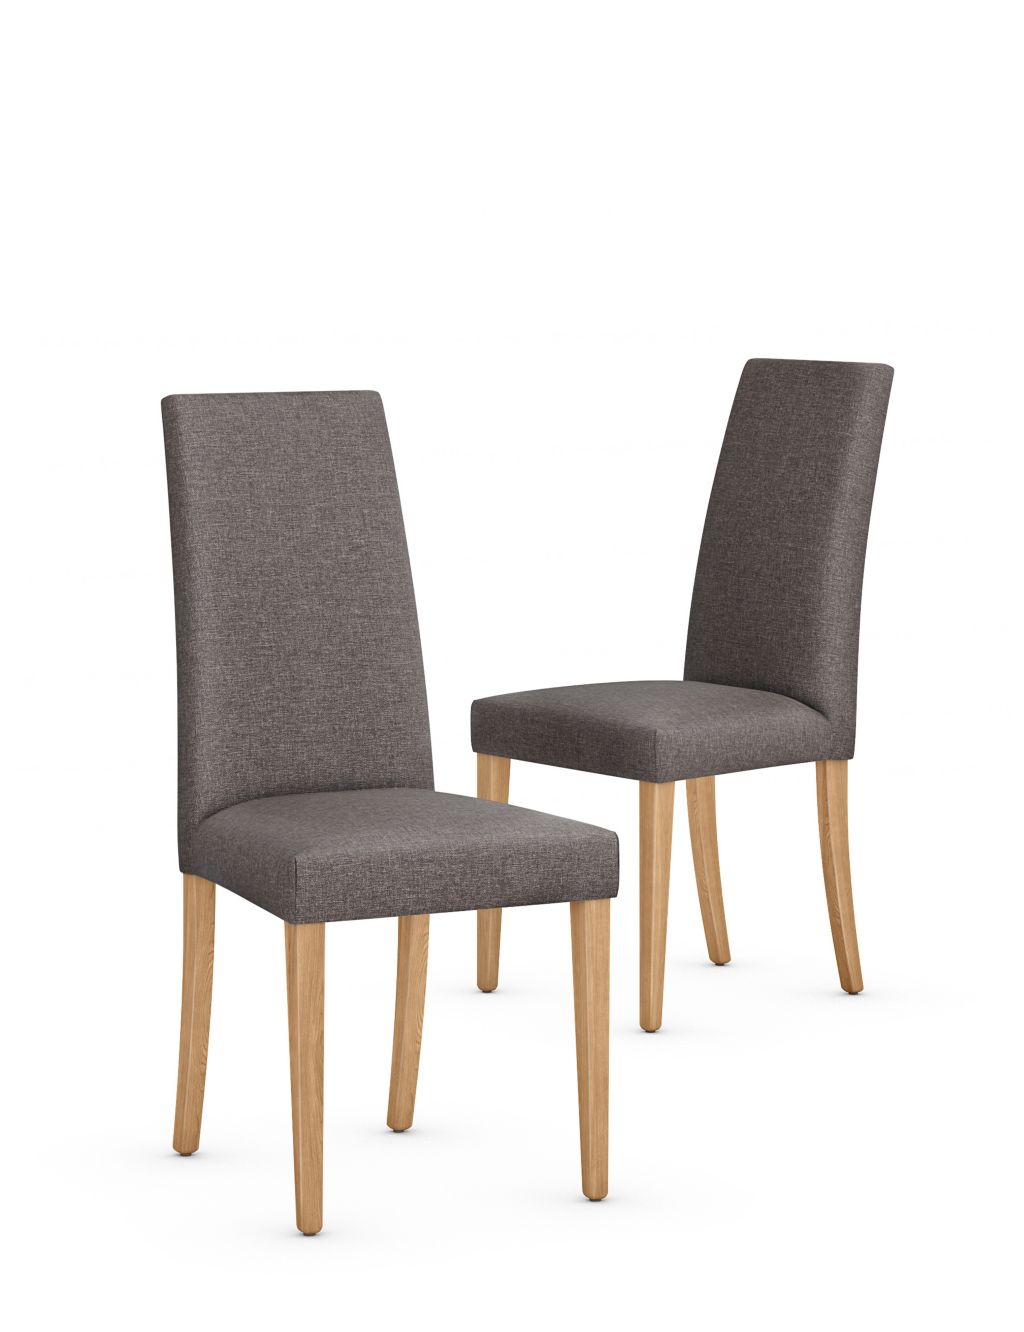 Set of 2 Alton Plain Dining Chairs 1 of 8